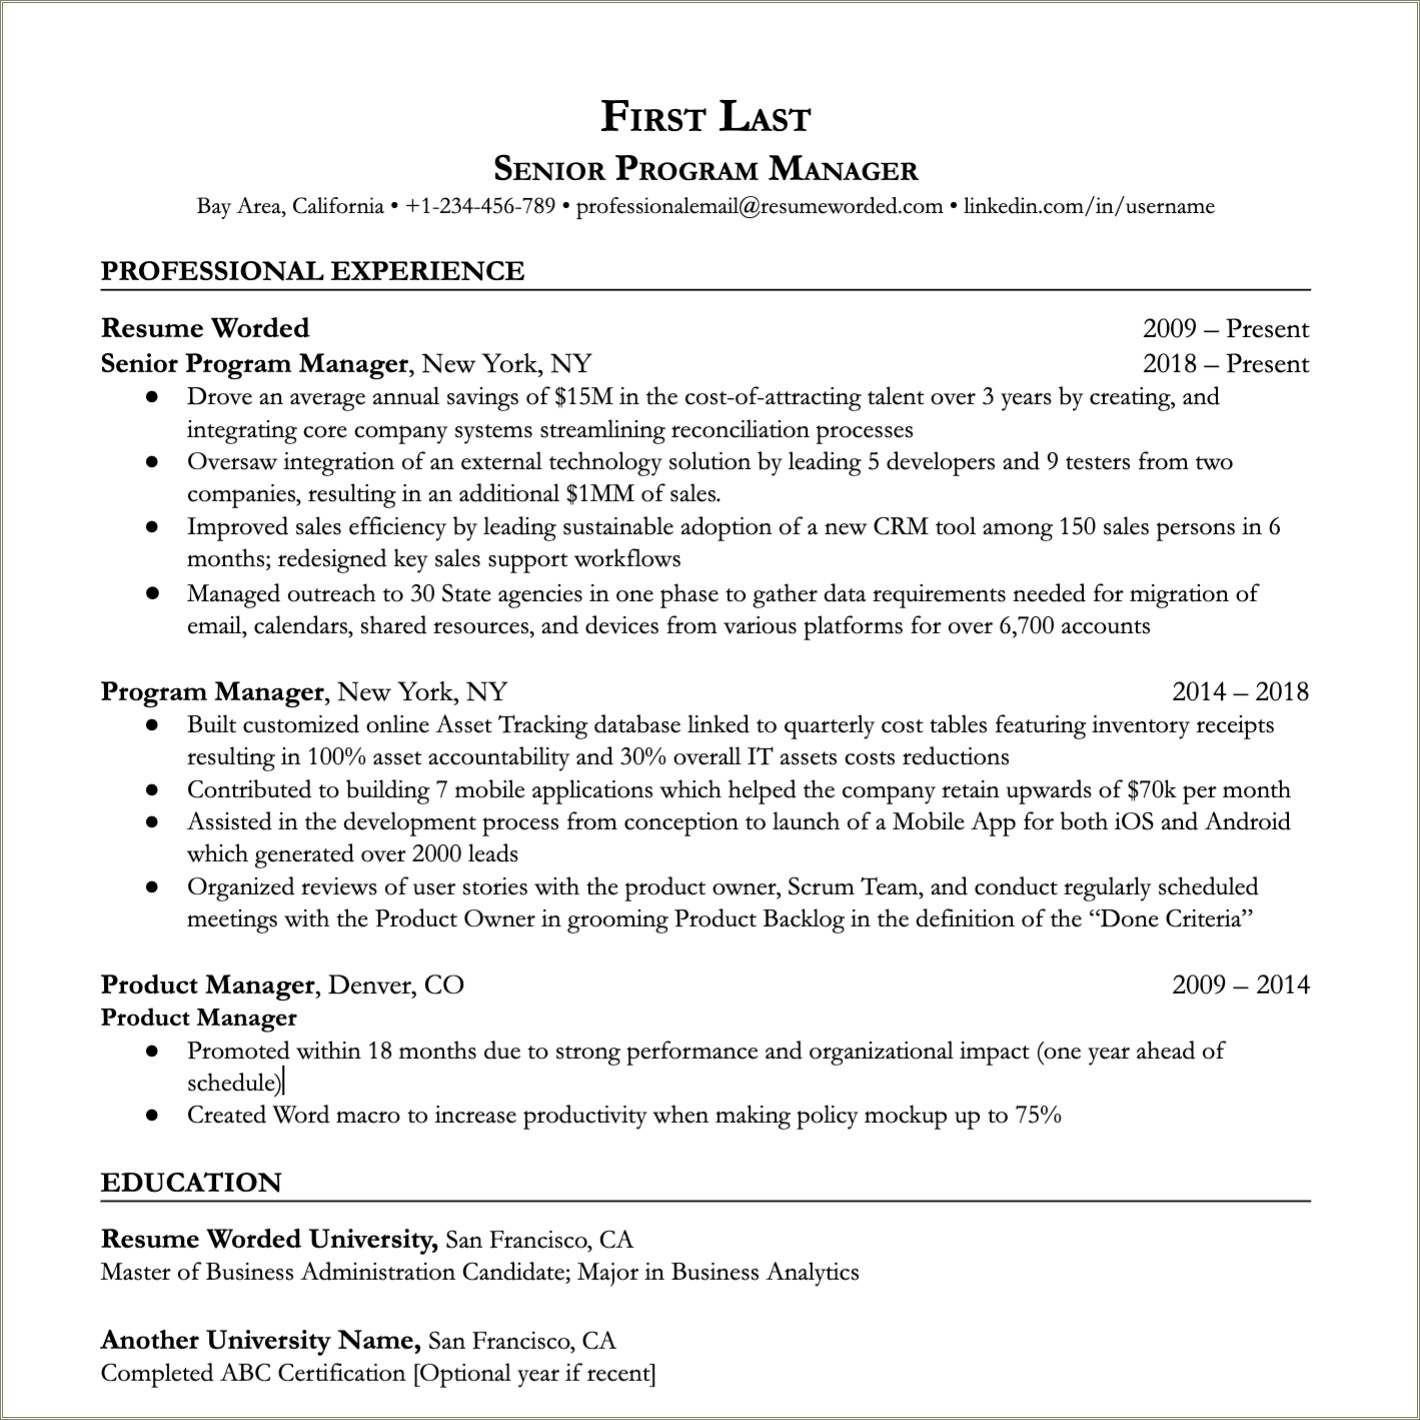 Resume Multiple Jobs In One Company